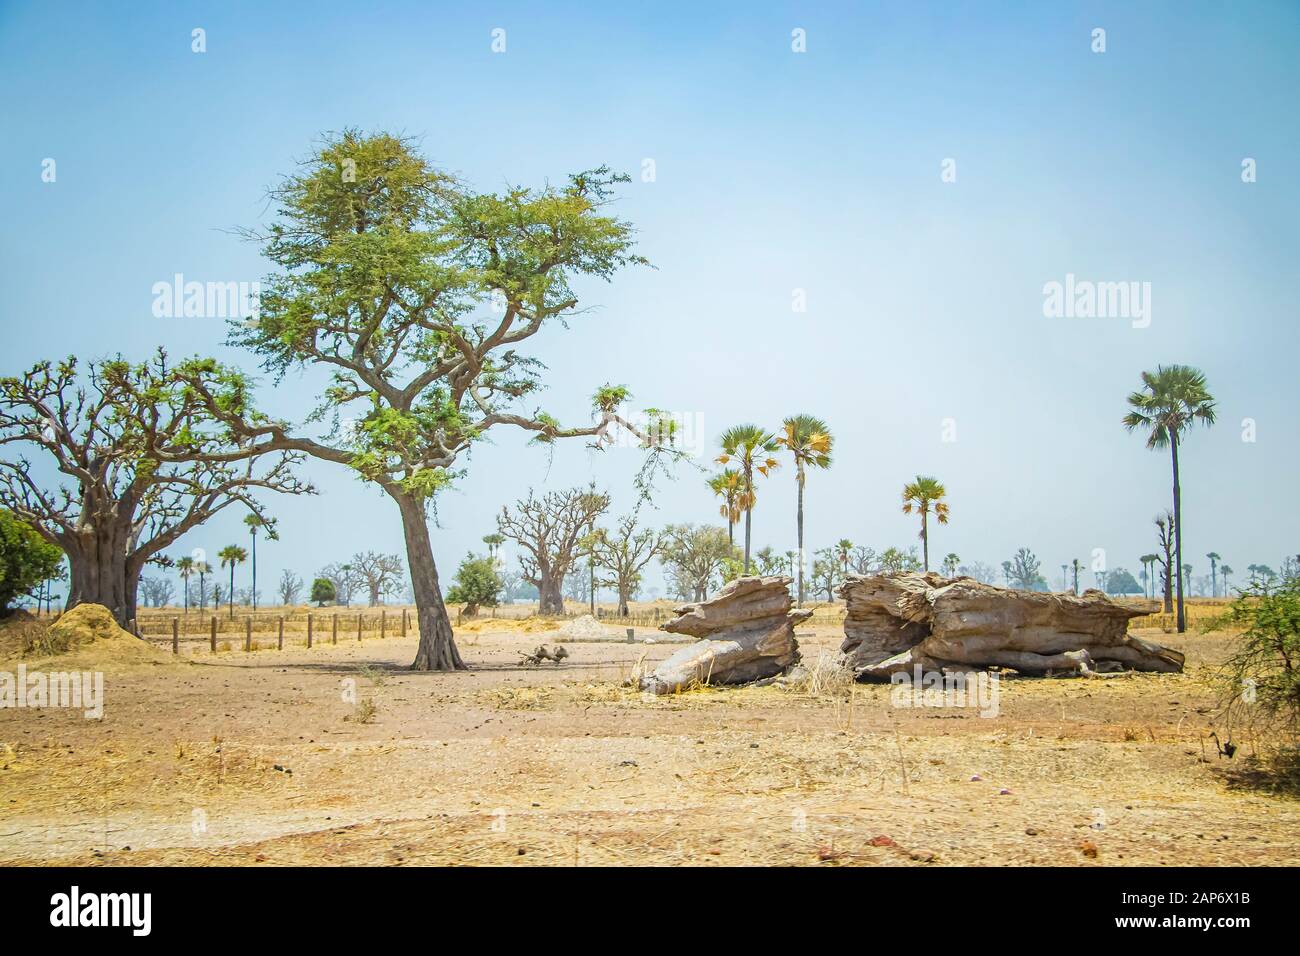 African savanna with typical trees and baobabs in Senegal, Africa. On the ground lies a fallen giant tree. Stock Photo